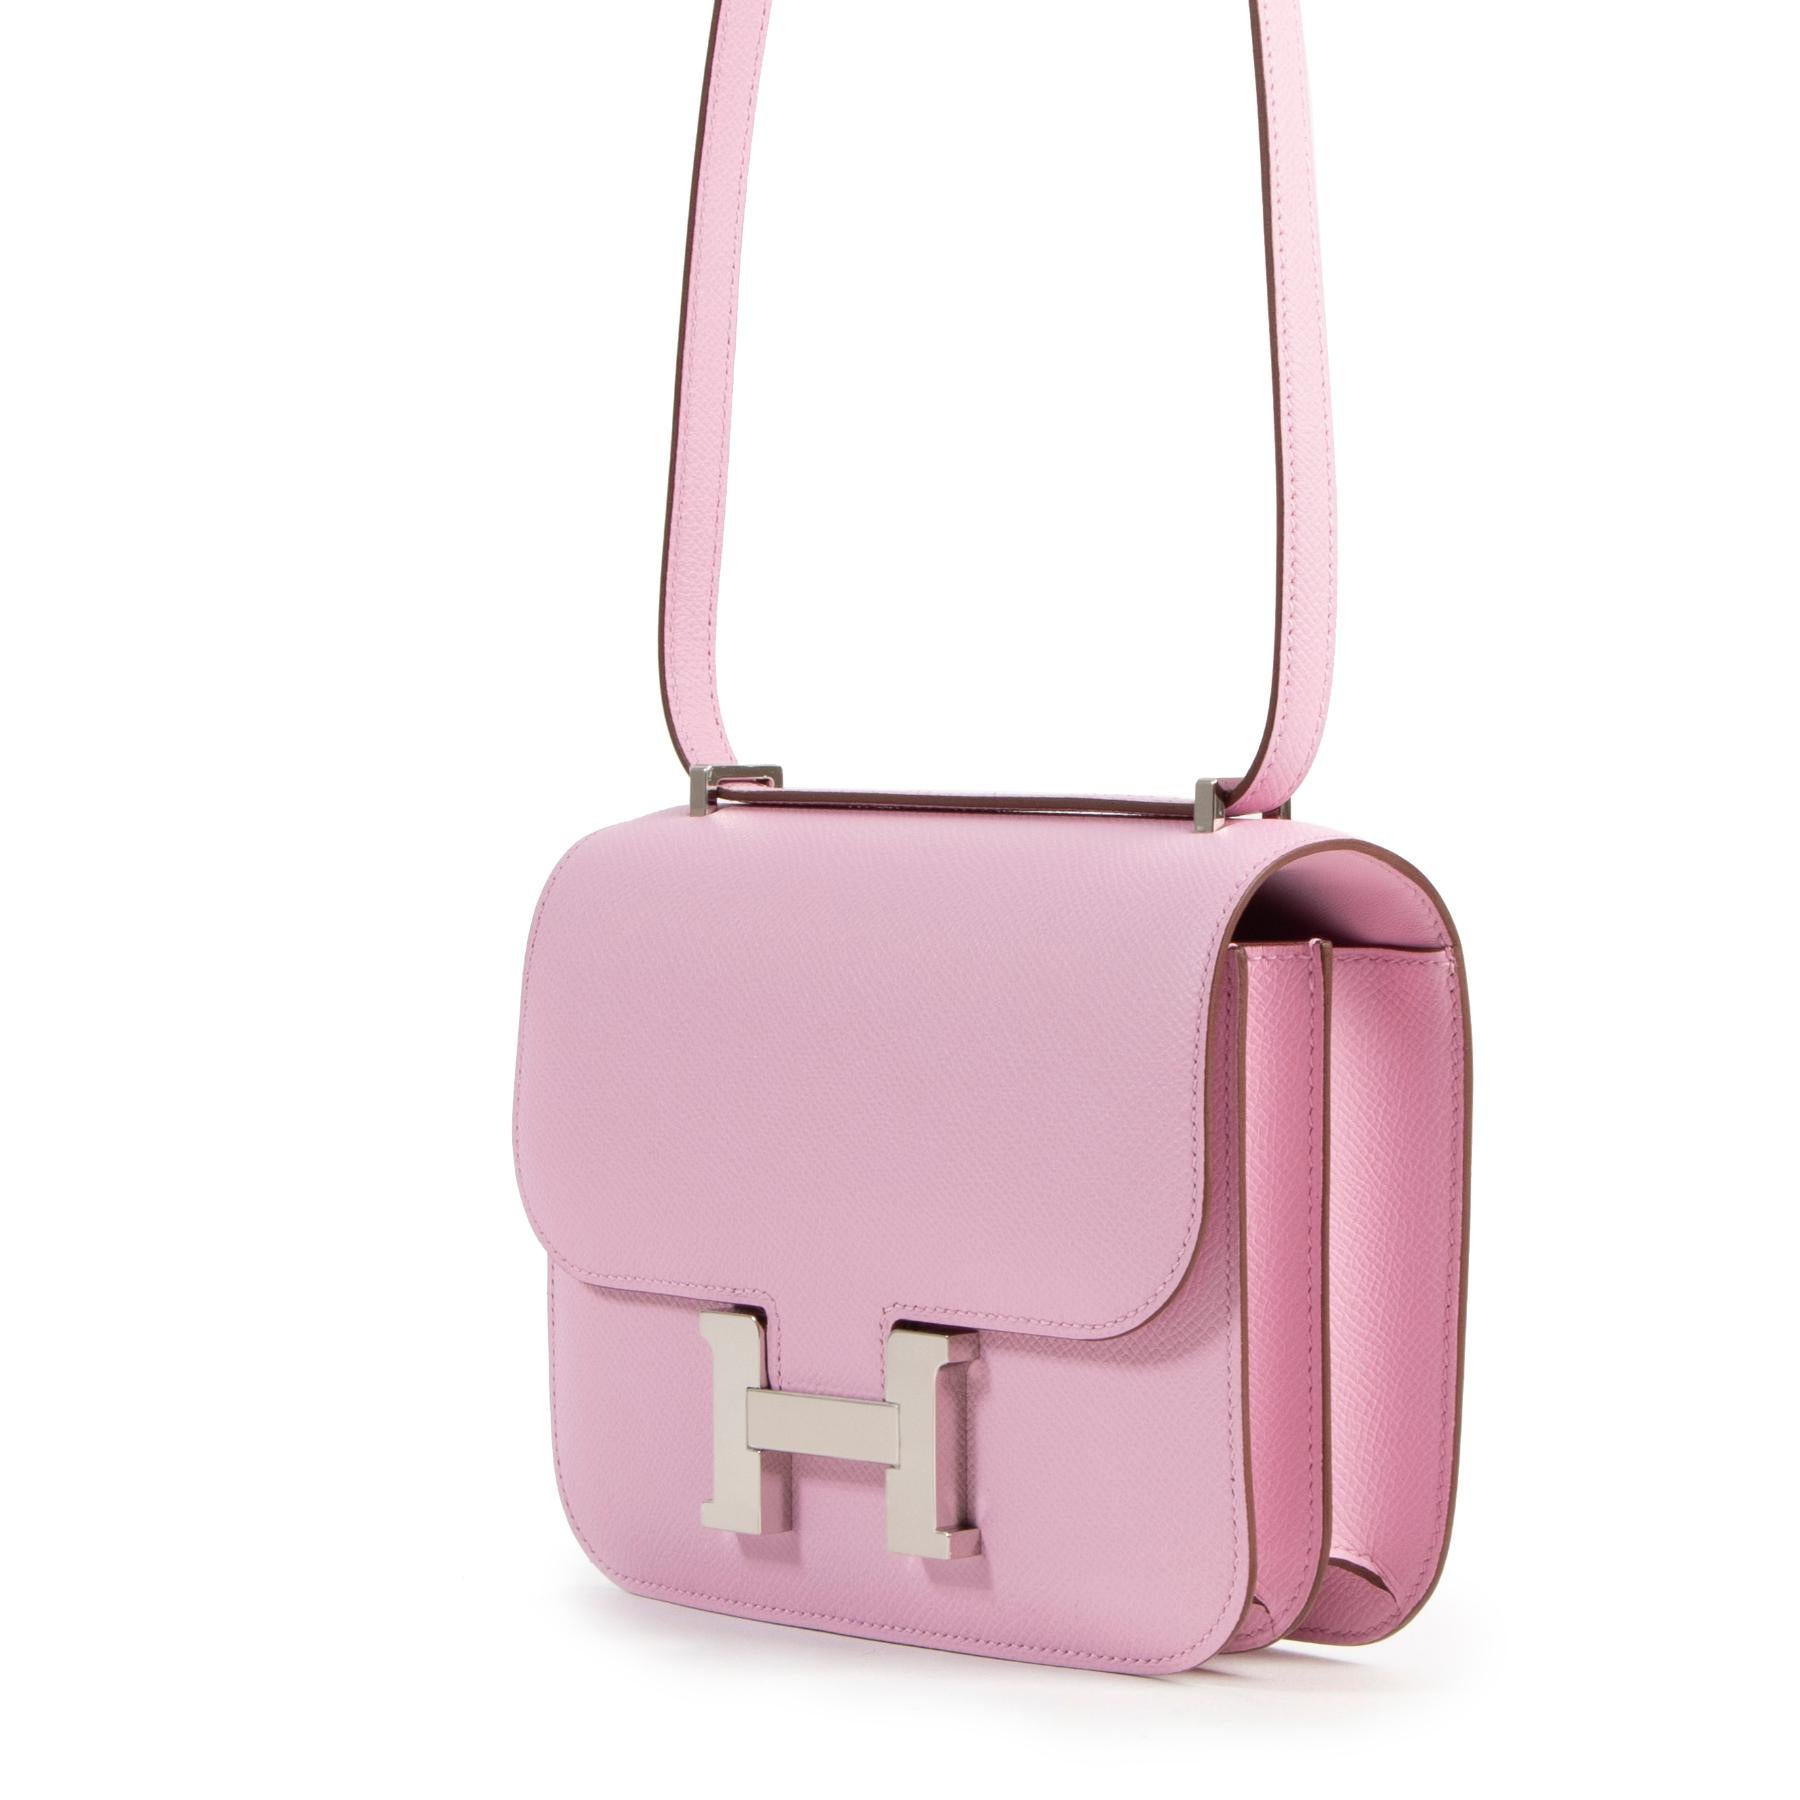 BRAND NEW

Hermès Constance 18 Mini Mauve Sylvestre Veau Epsom PHW

Fall head over heels in love with this brand new Hermès Constance III Mini. Discover the supreme quality, style and beauty upheld by this timeless fashion house. Its 18 cm body is